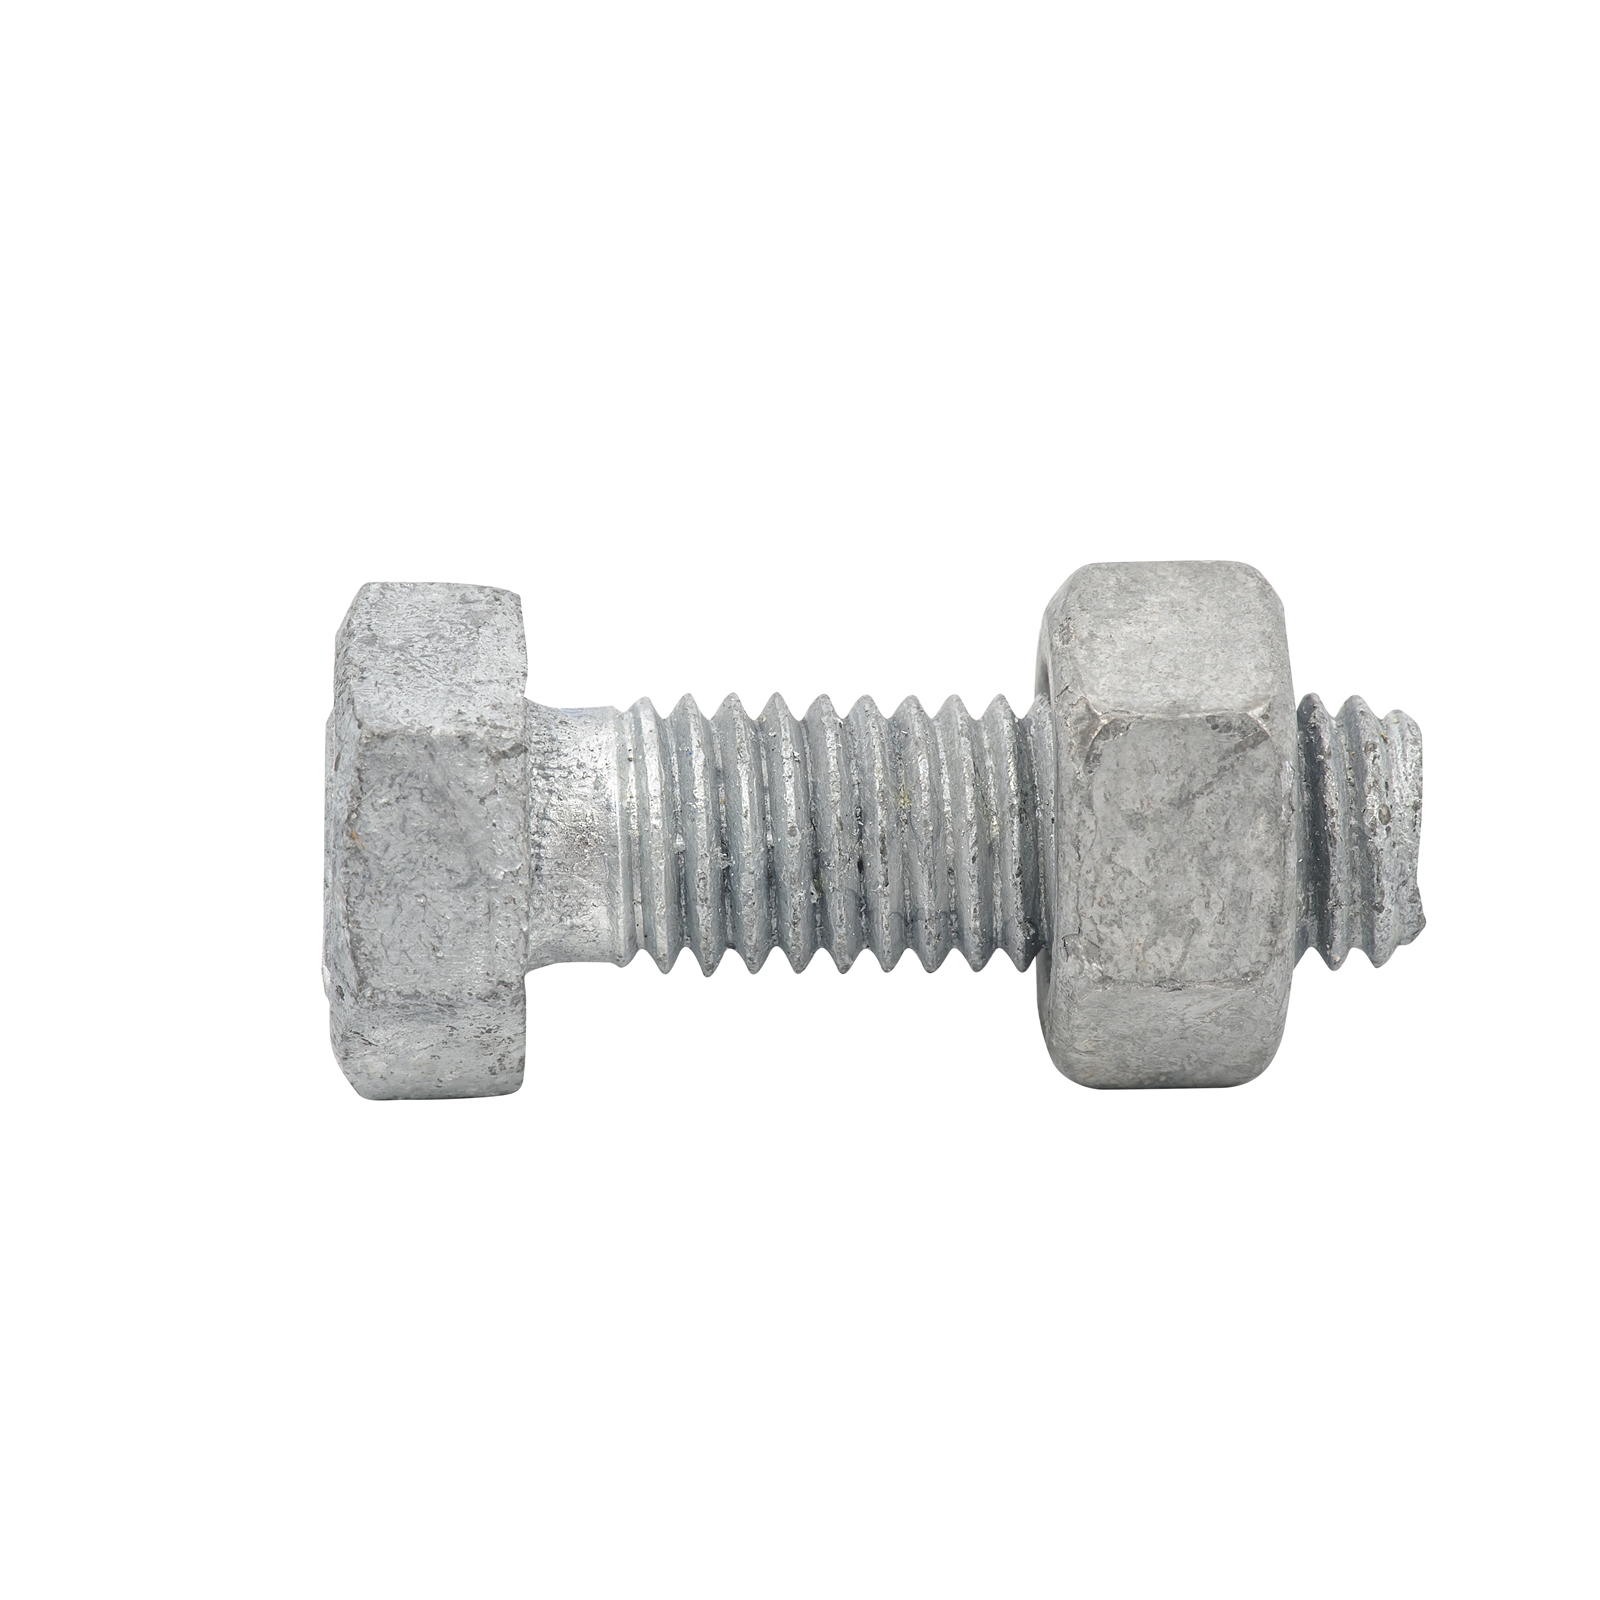 Zenith M8 x 25mm Galvanised Hex Head Bolt and Nut